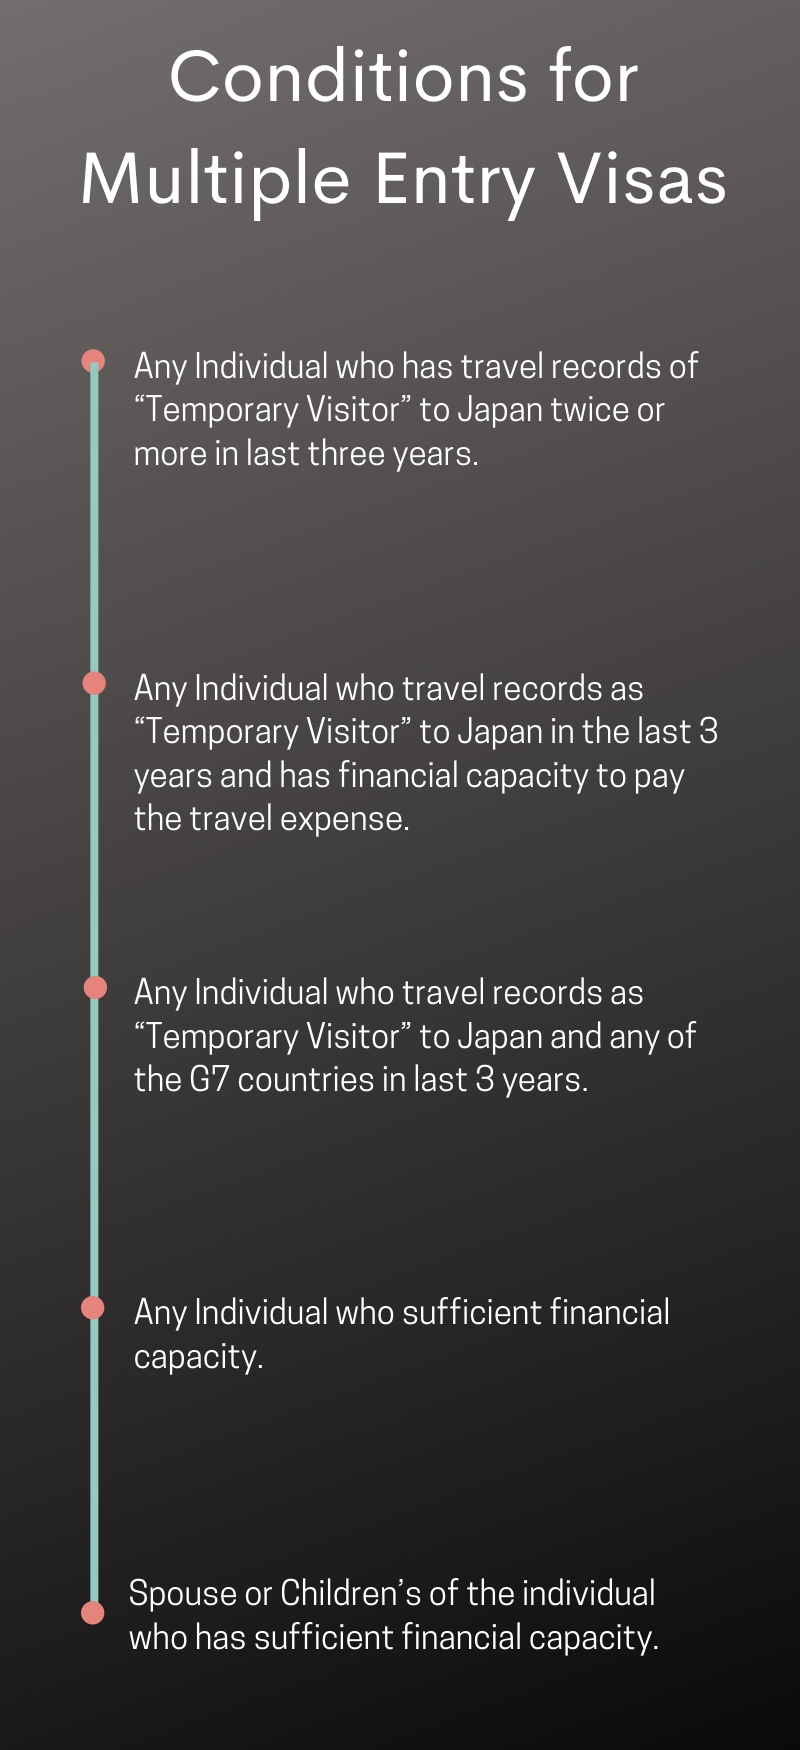 Conditions for multiple entry visa for Japan